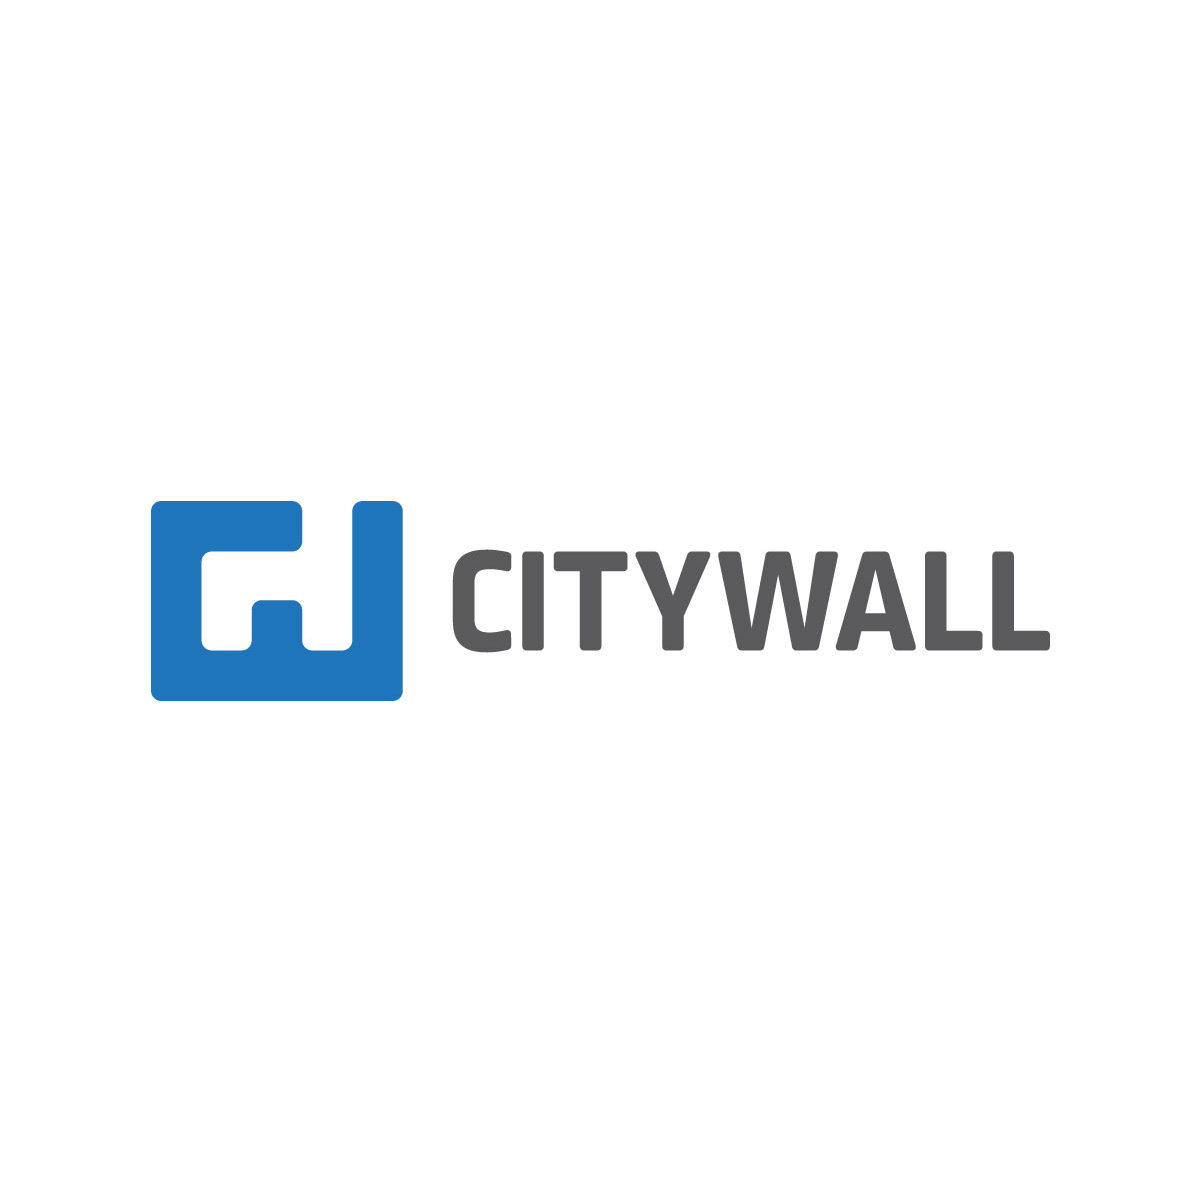 CITYWALL